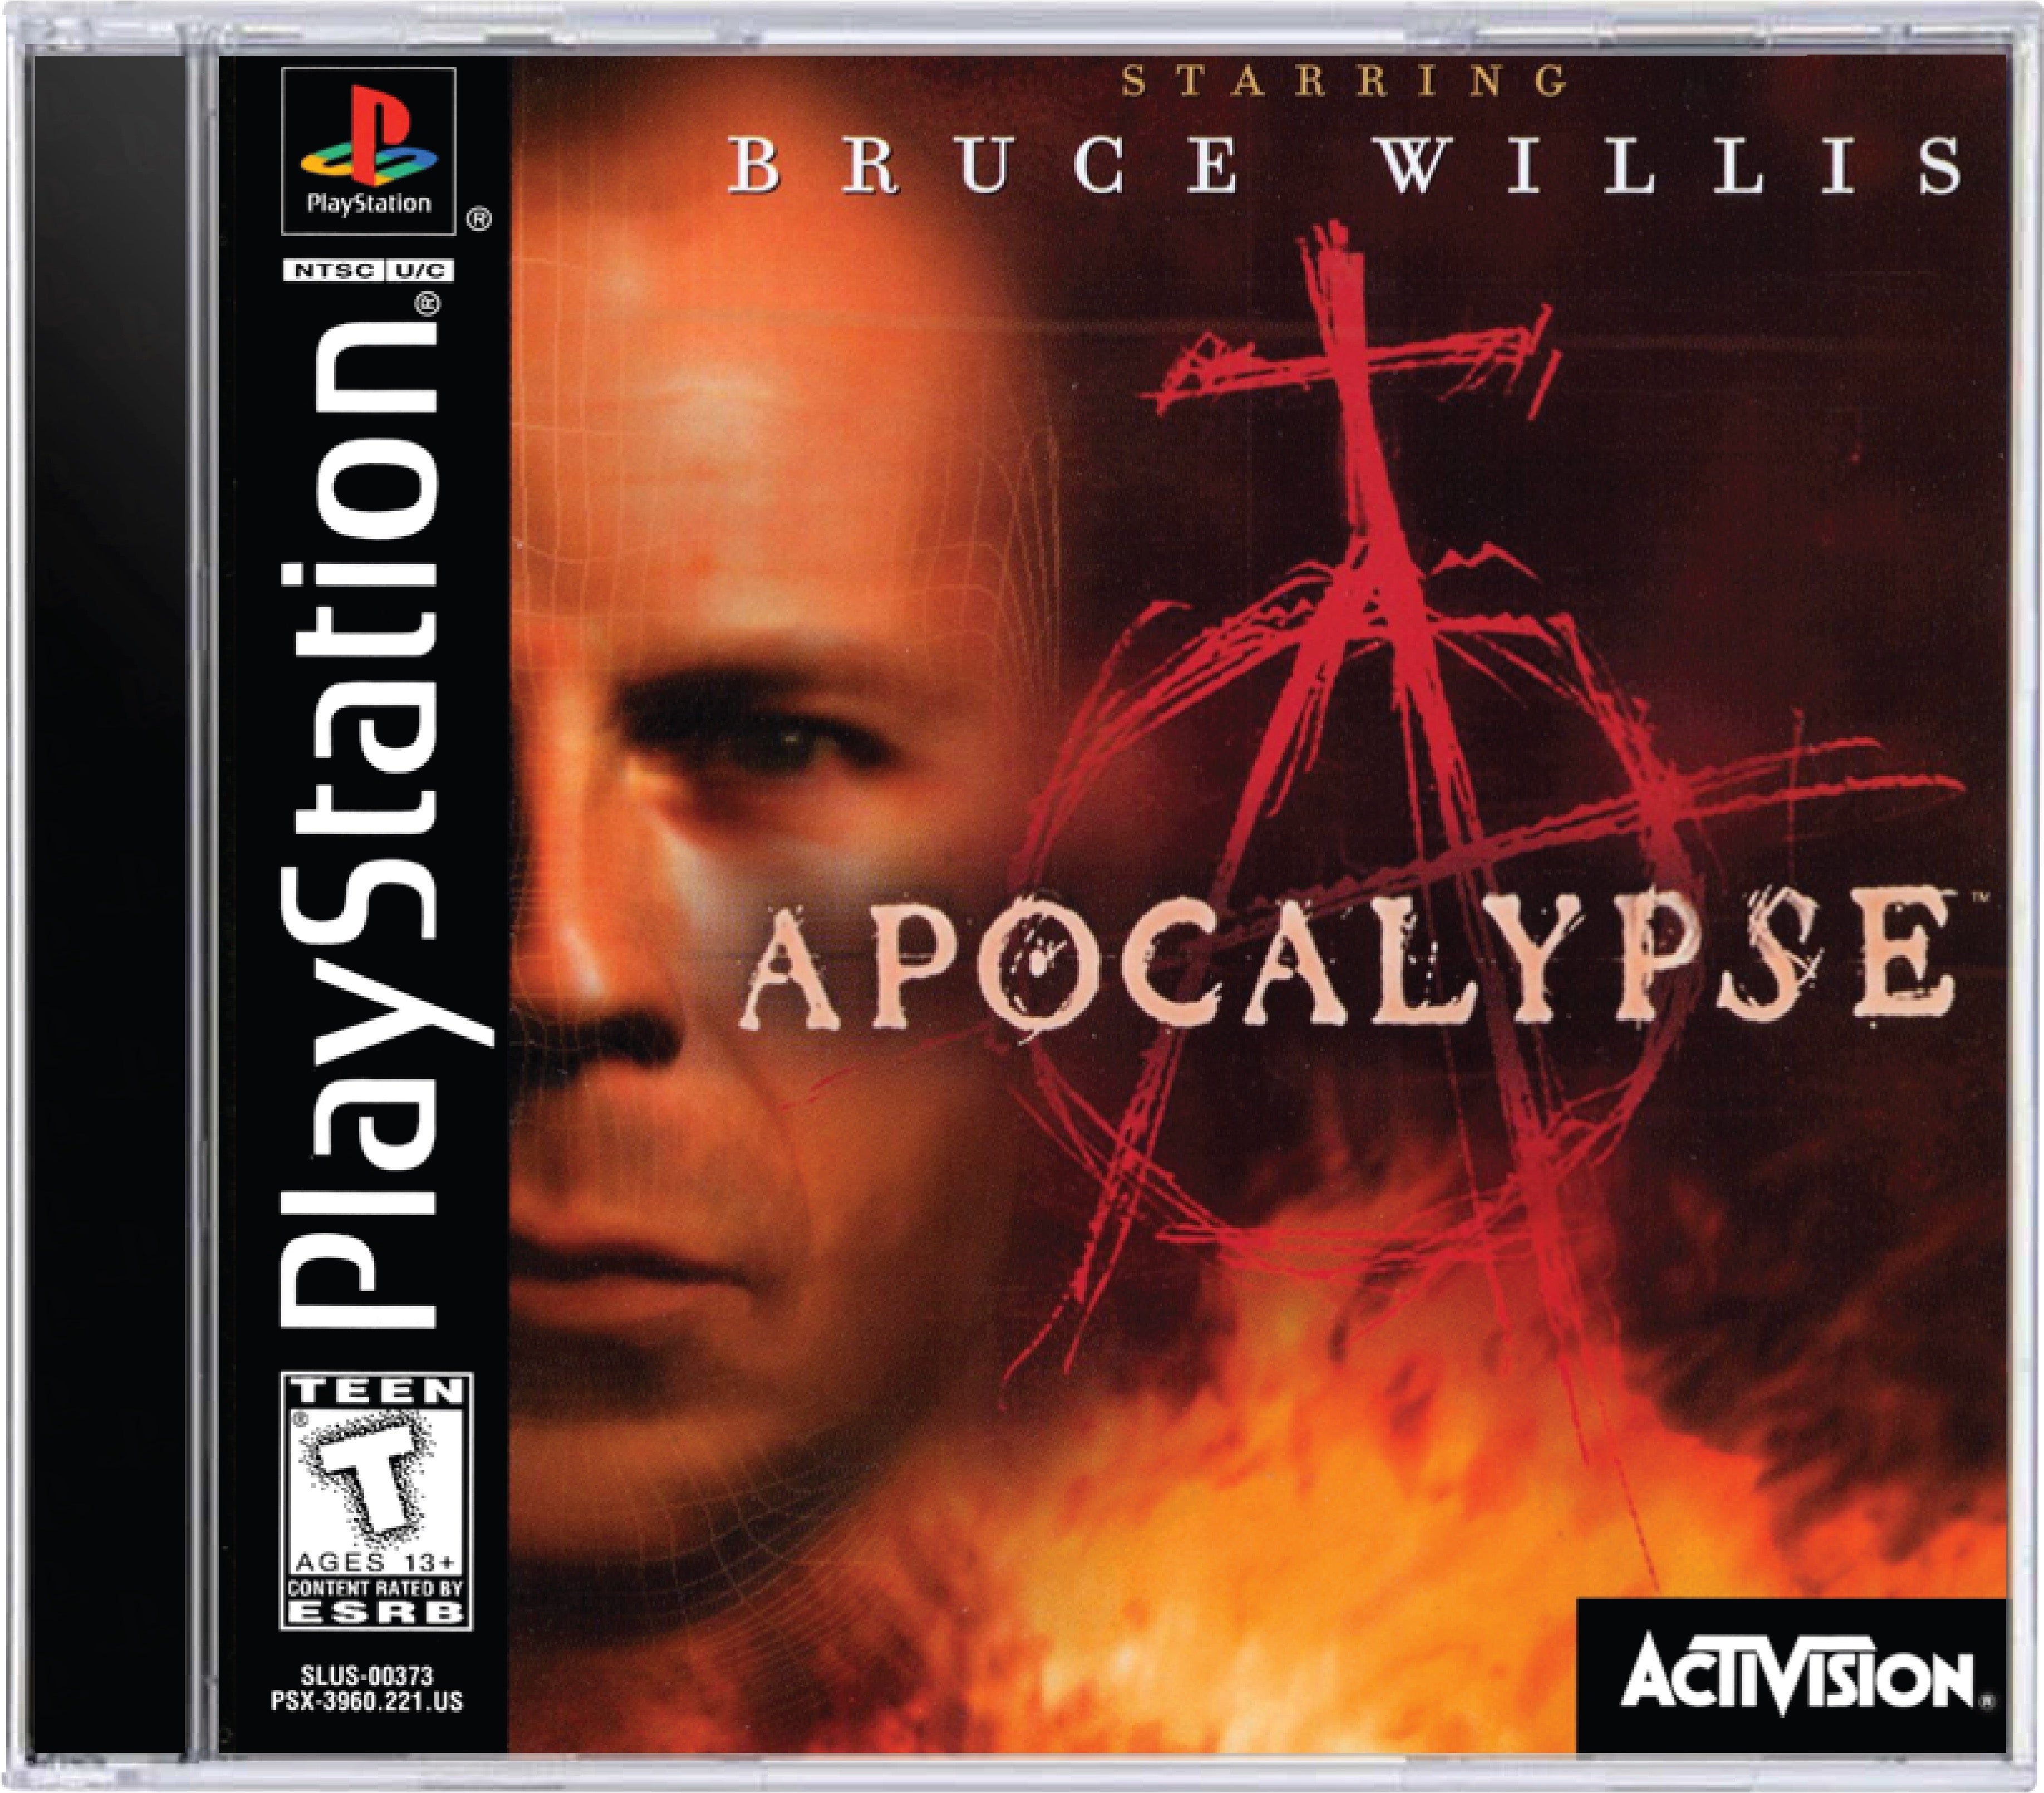 Apocalypse Cover Art and Product Photo